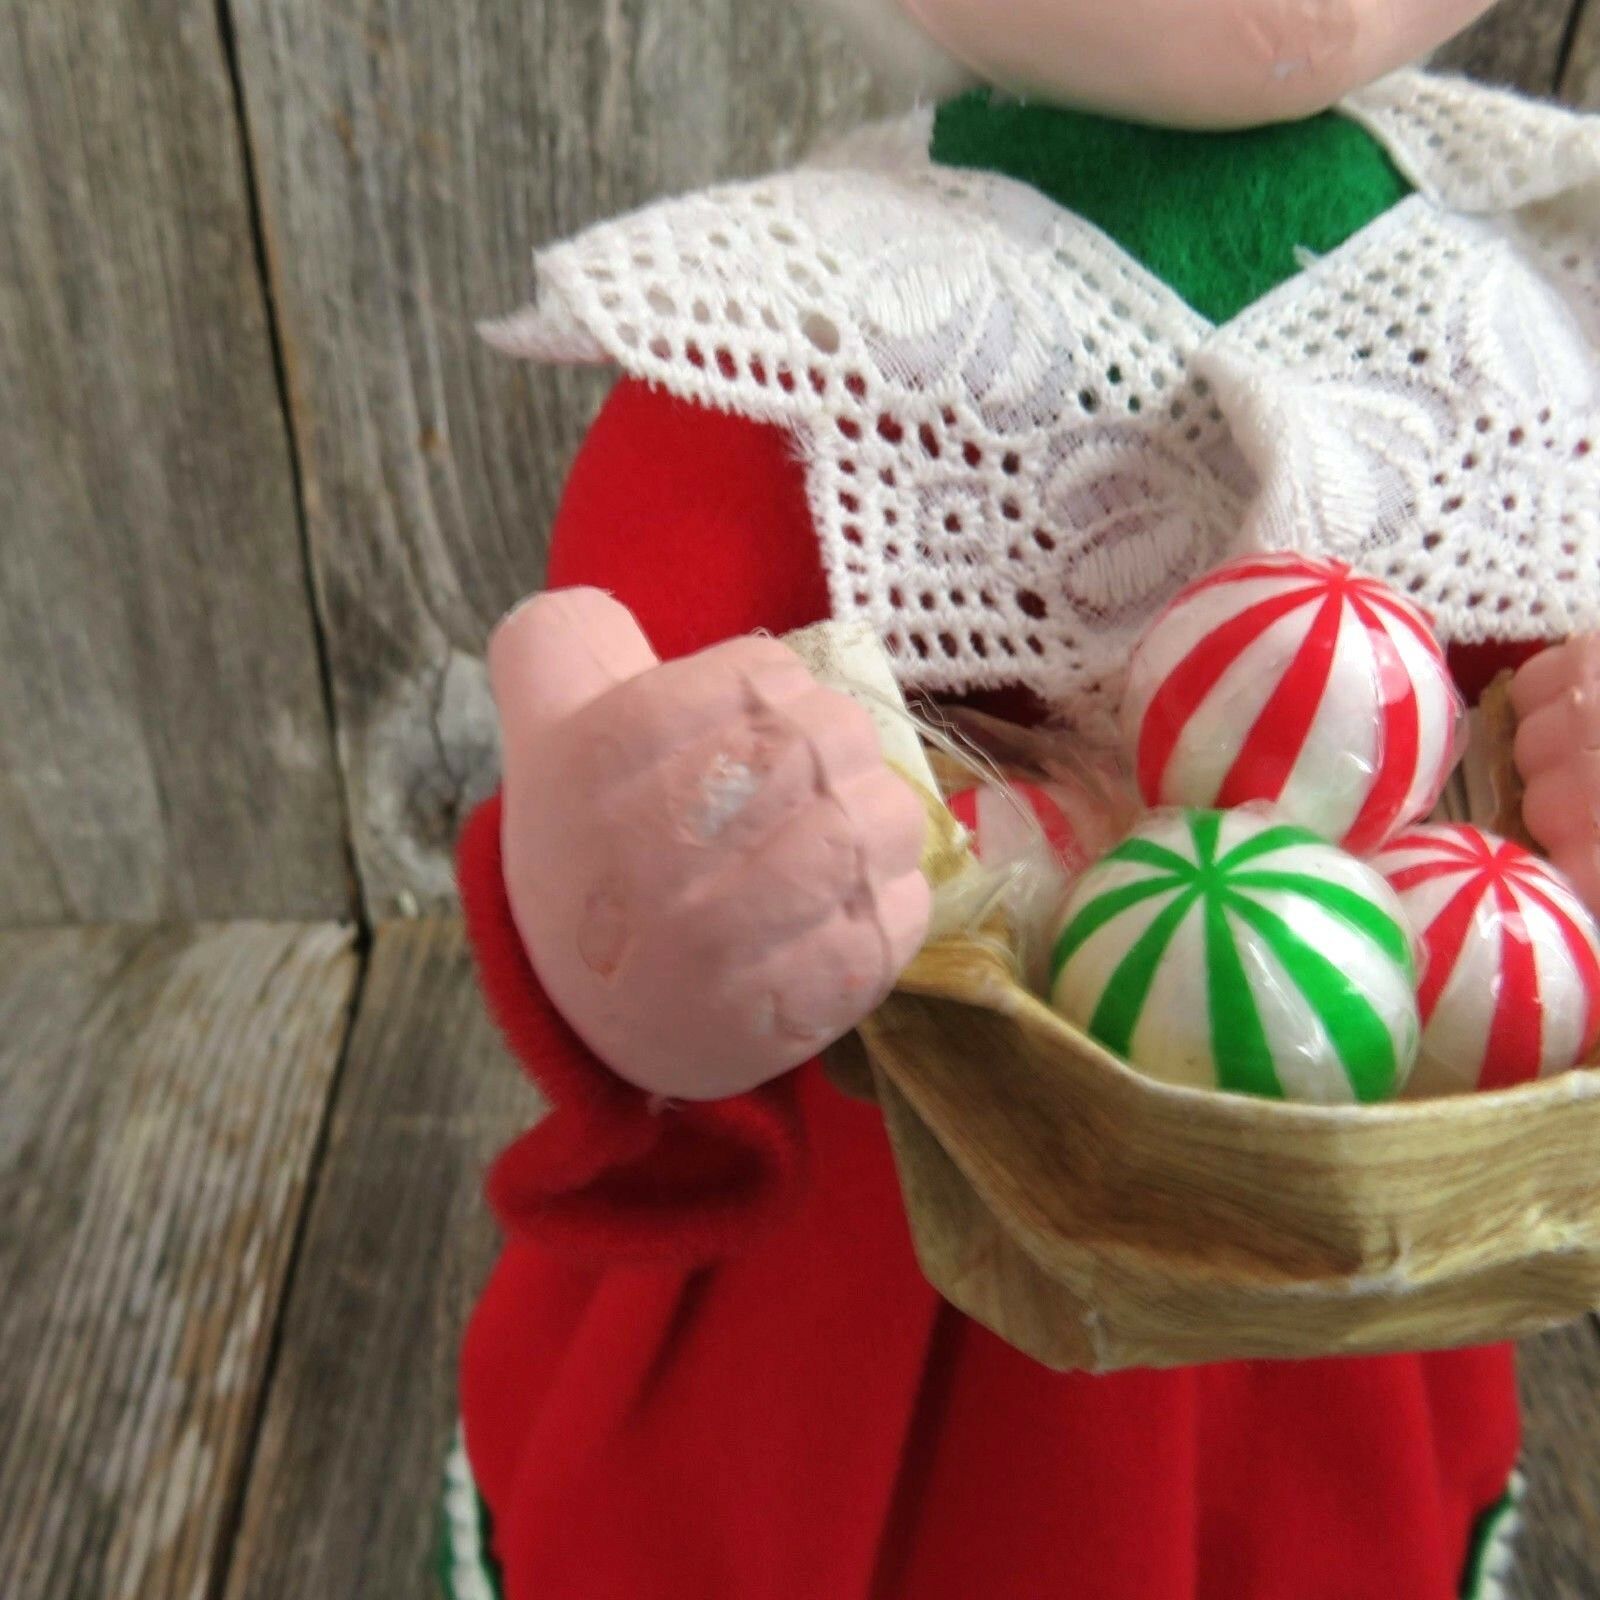 Vintage Mrs Claus Doll Figurine Christmas Paper Mache Plaster Chalk Decor Table Topper - At Grandma's Table